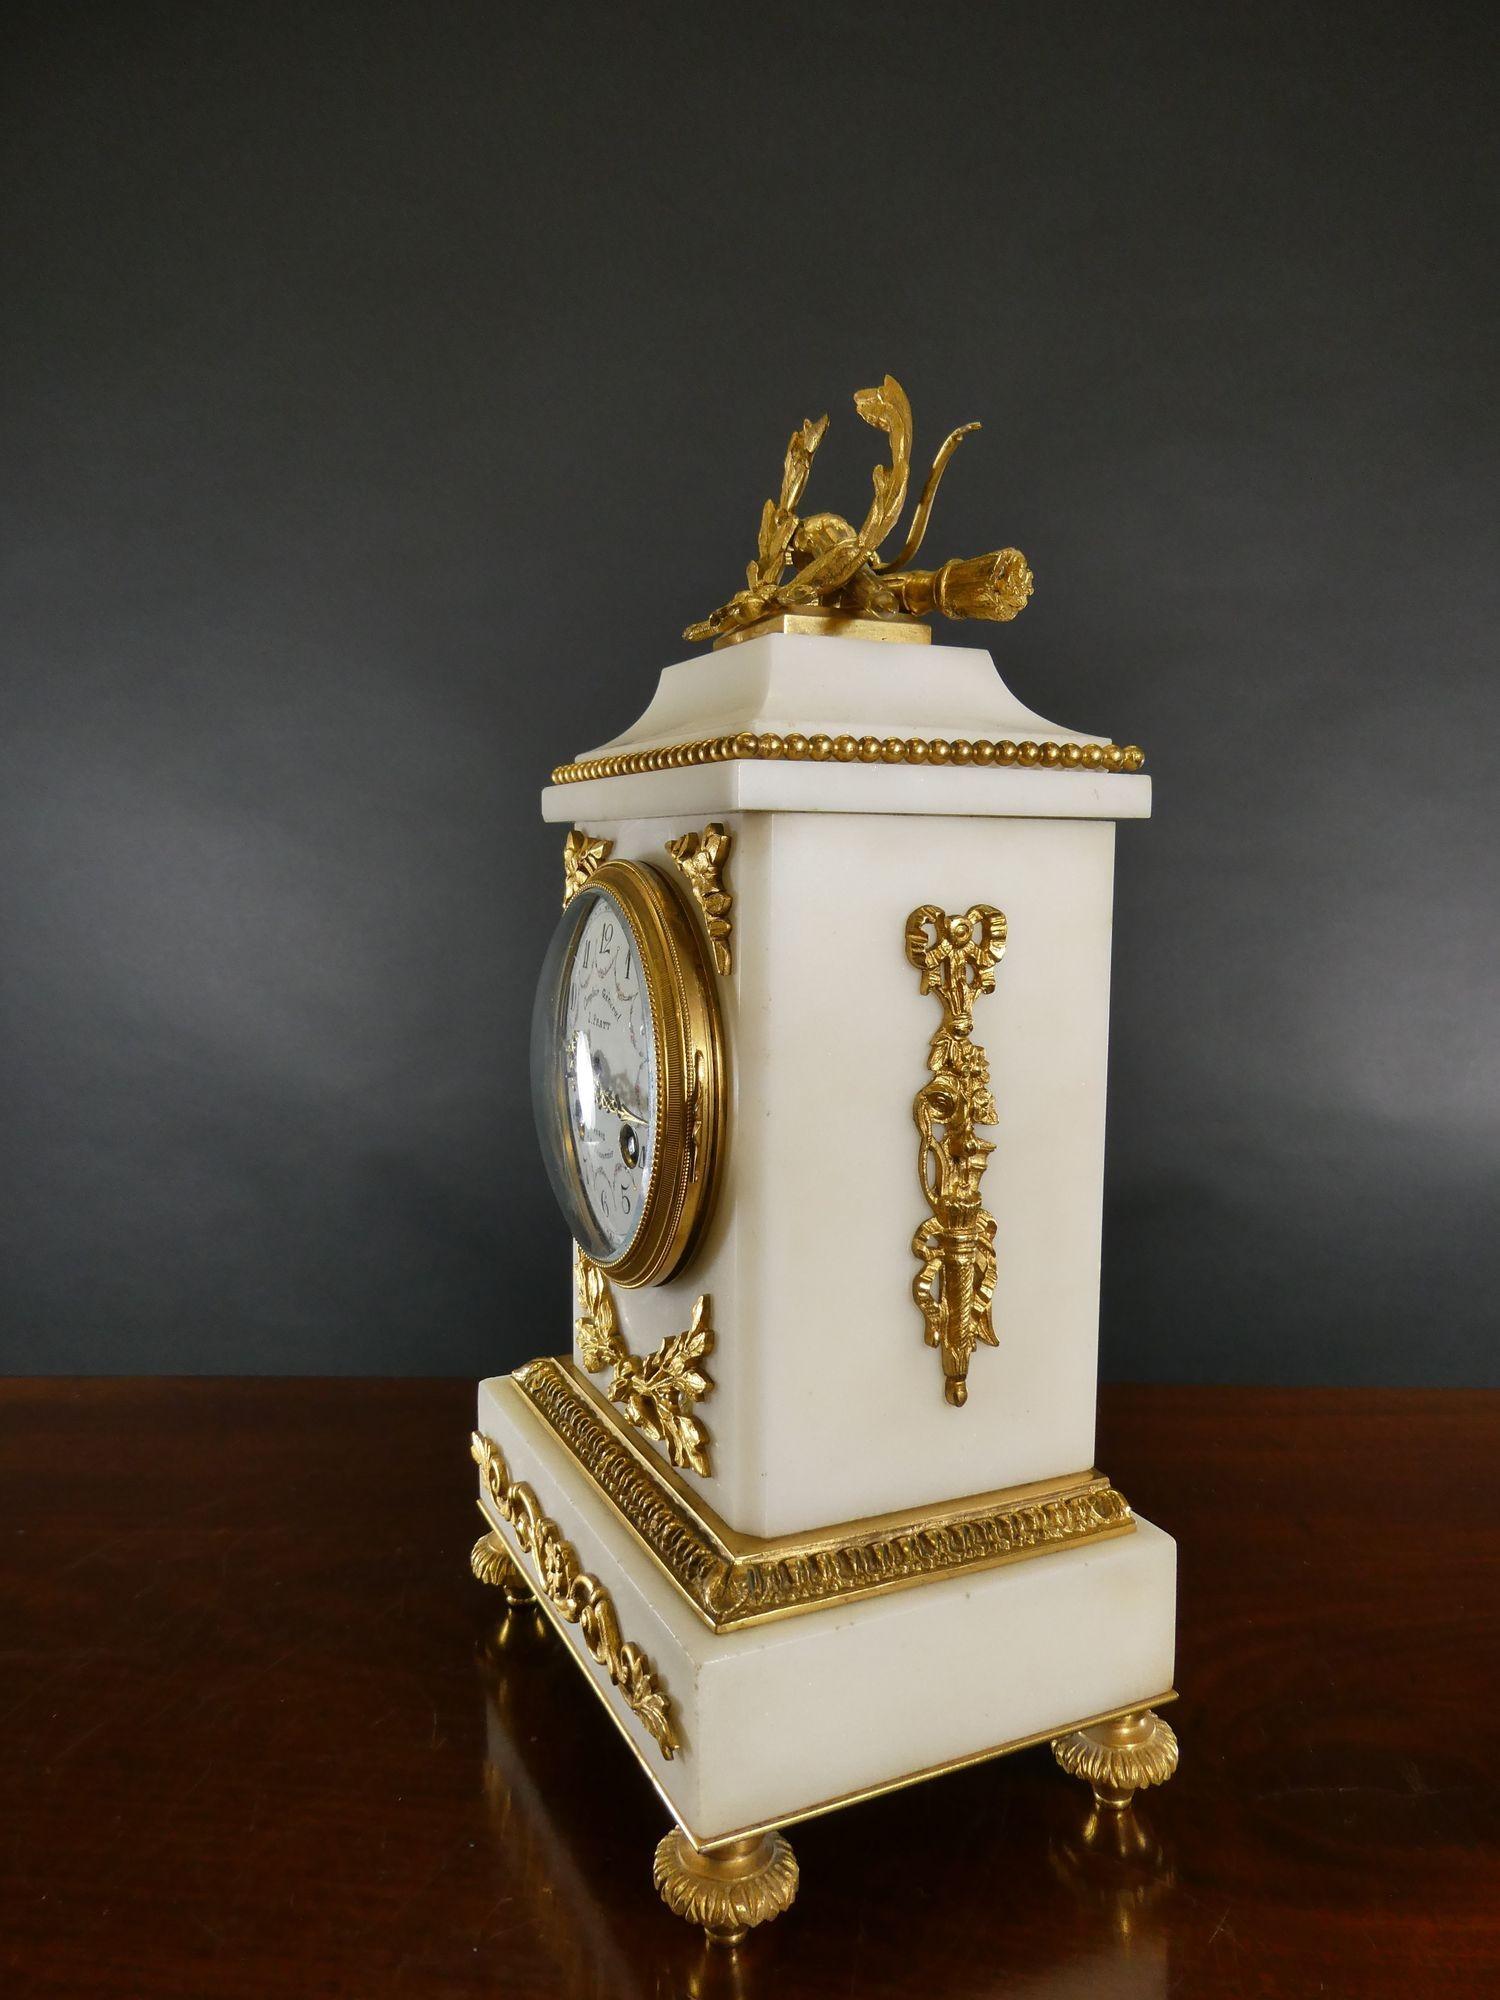 French white marble and Ormolu mantel clock by Samuel Marti.
 
White marble case with stepped raised plinth with ormolu mounts and beaded decoration surmounted by an ormolu wreath and standing on decorative ormolu feet. Gilded chased bezel with